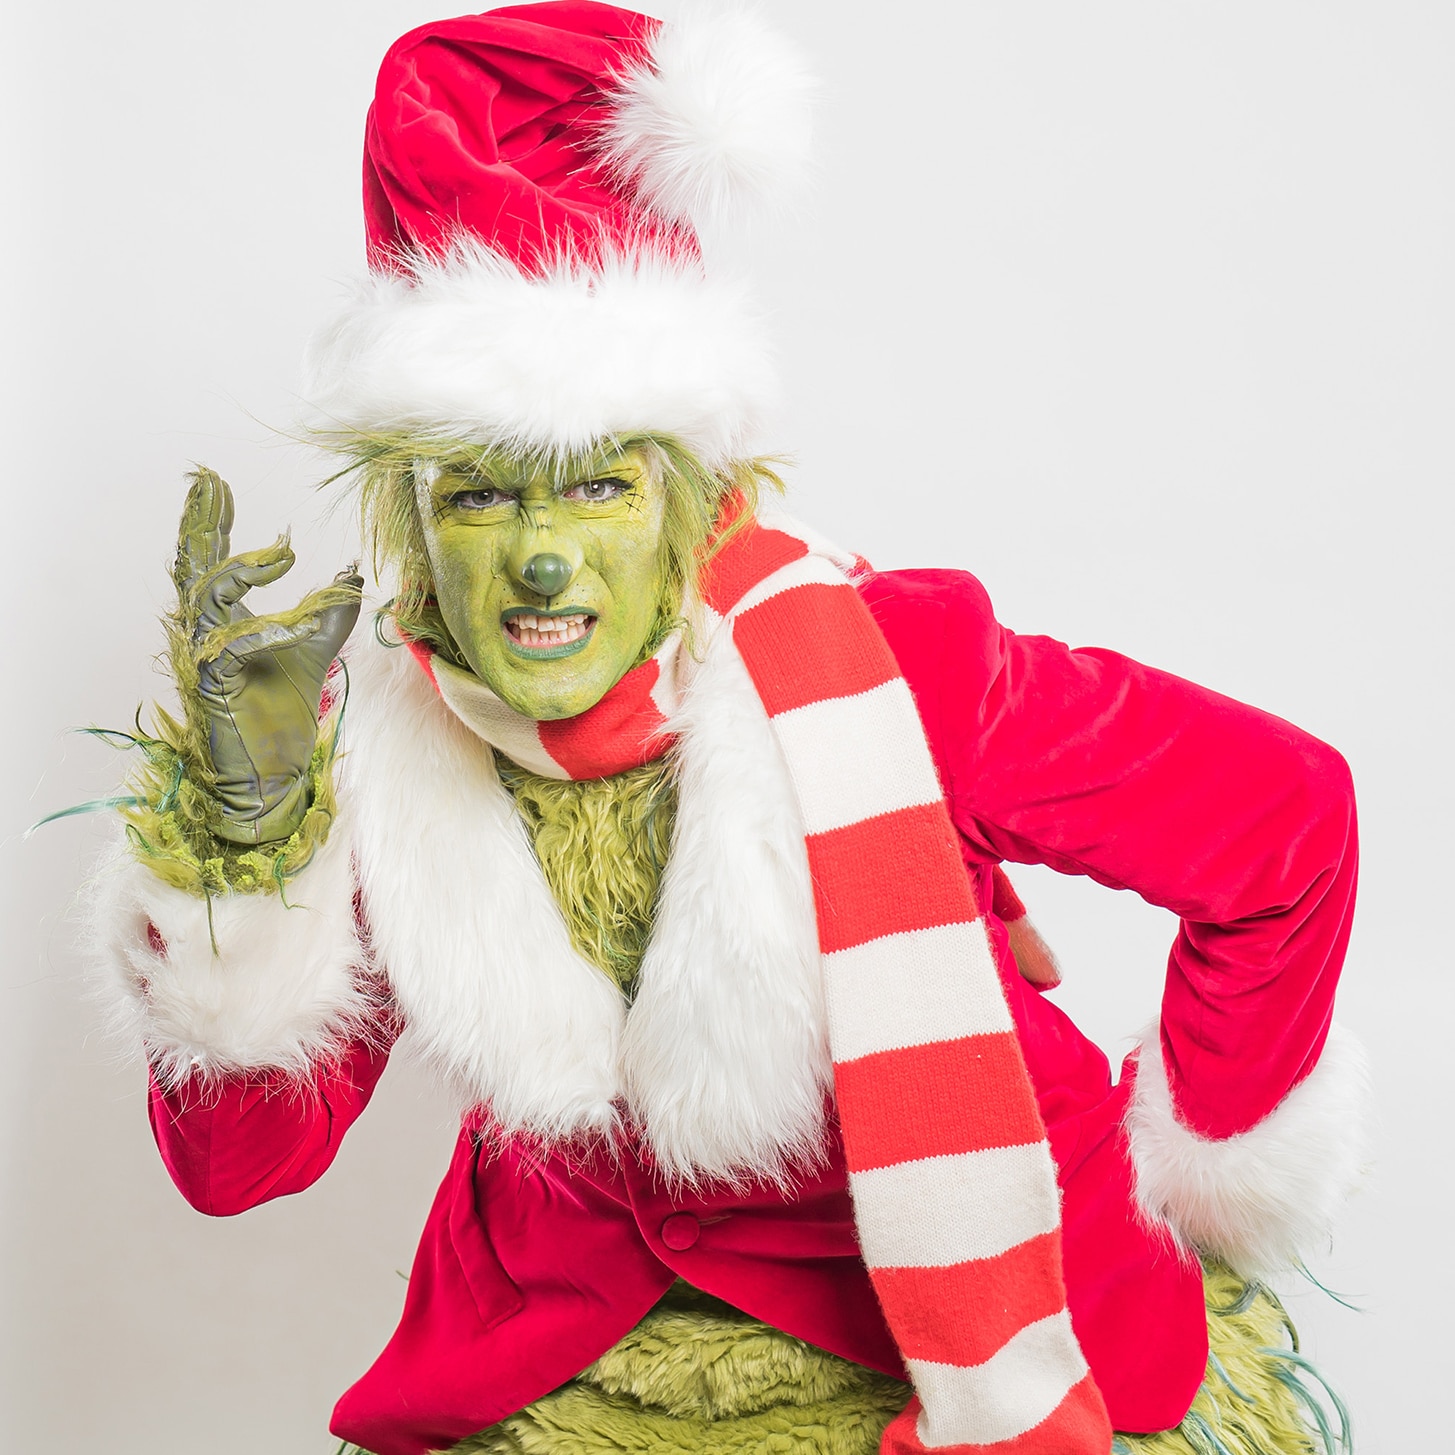 the-grinch-dr-seuss-the-grinch-musical-character-nbc